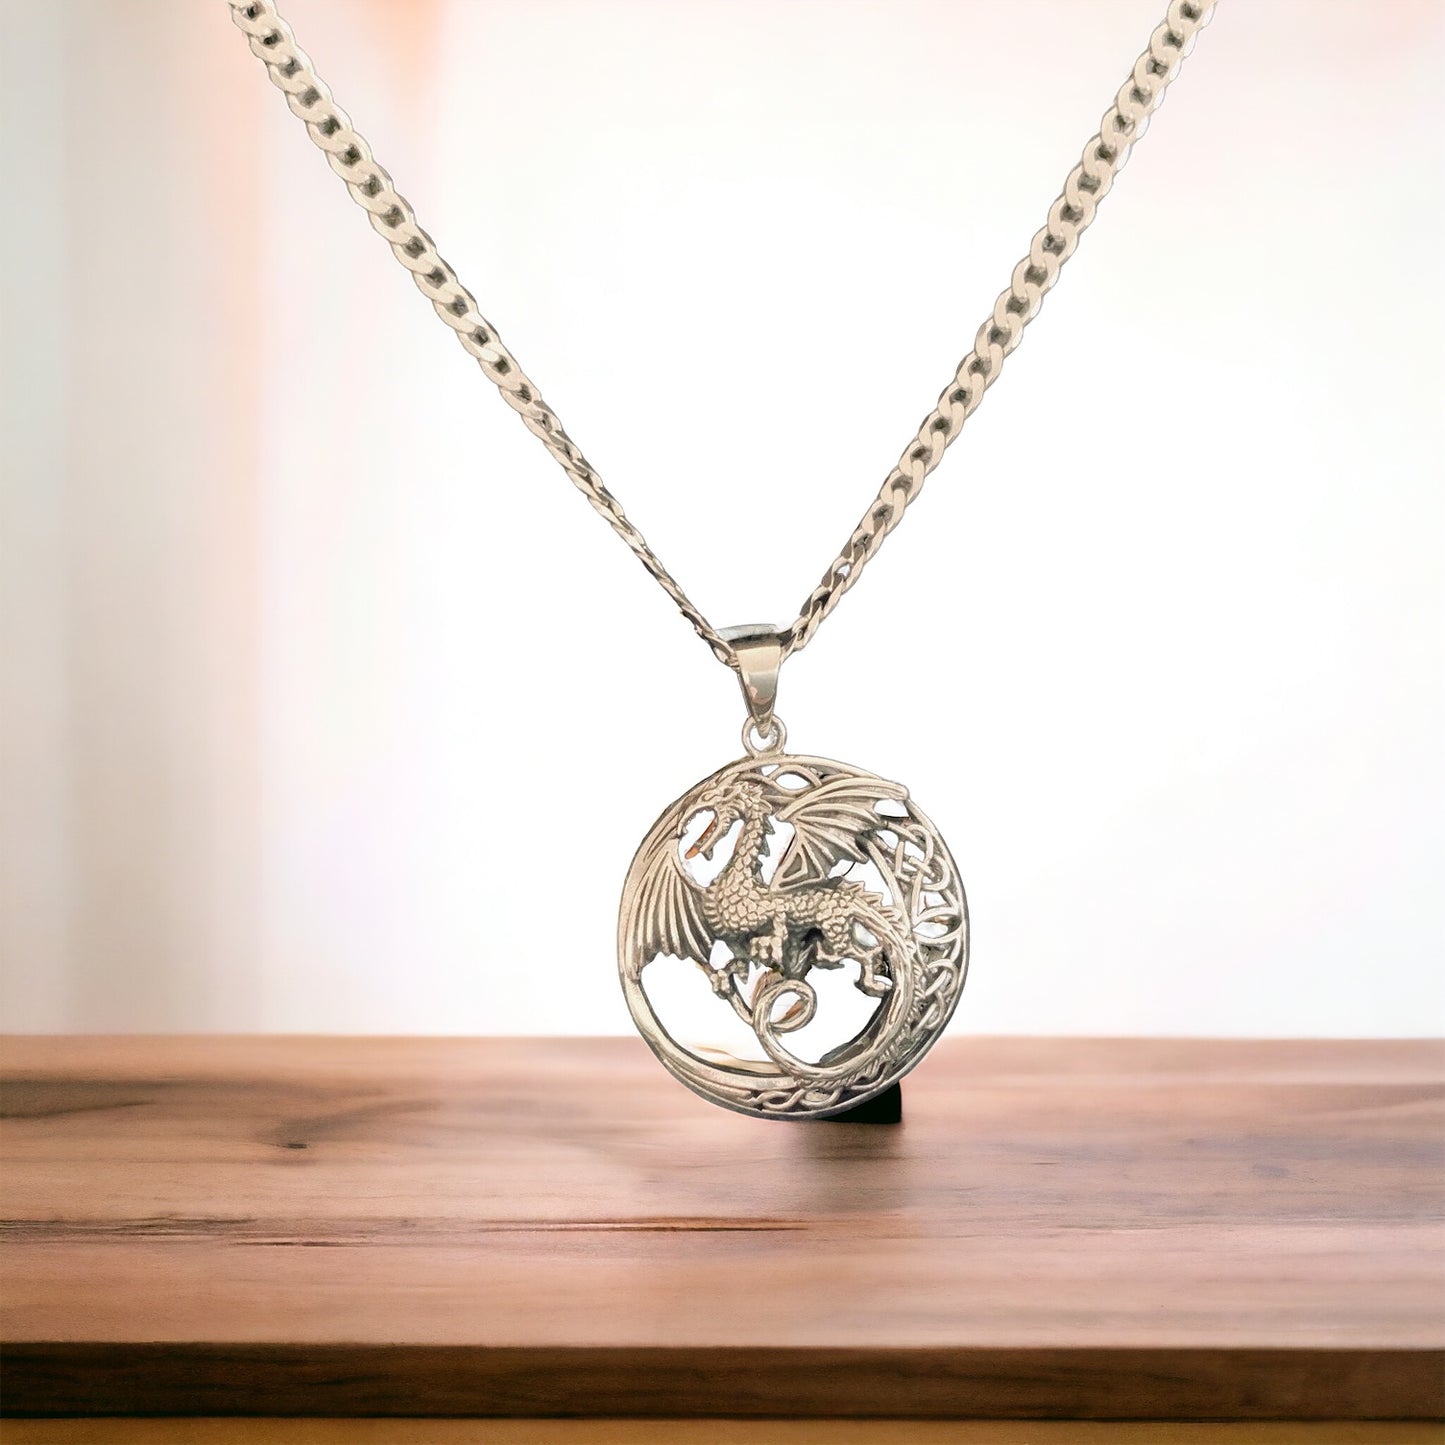 Handcast 925 Sterling Silver Celtic Dragon Pendant Necklace + Free Chain